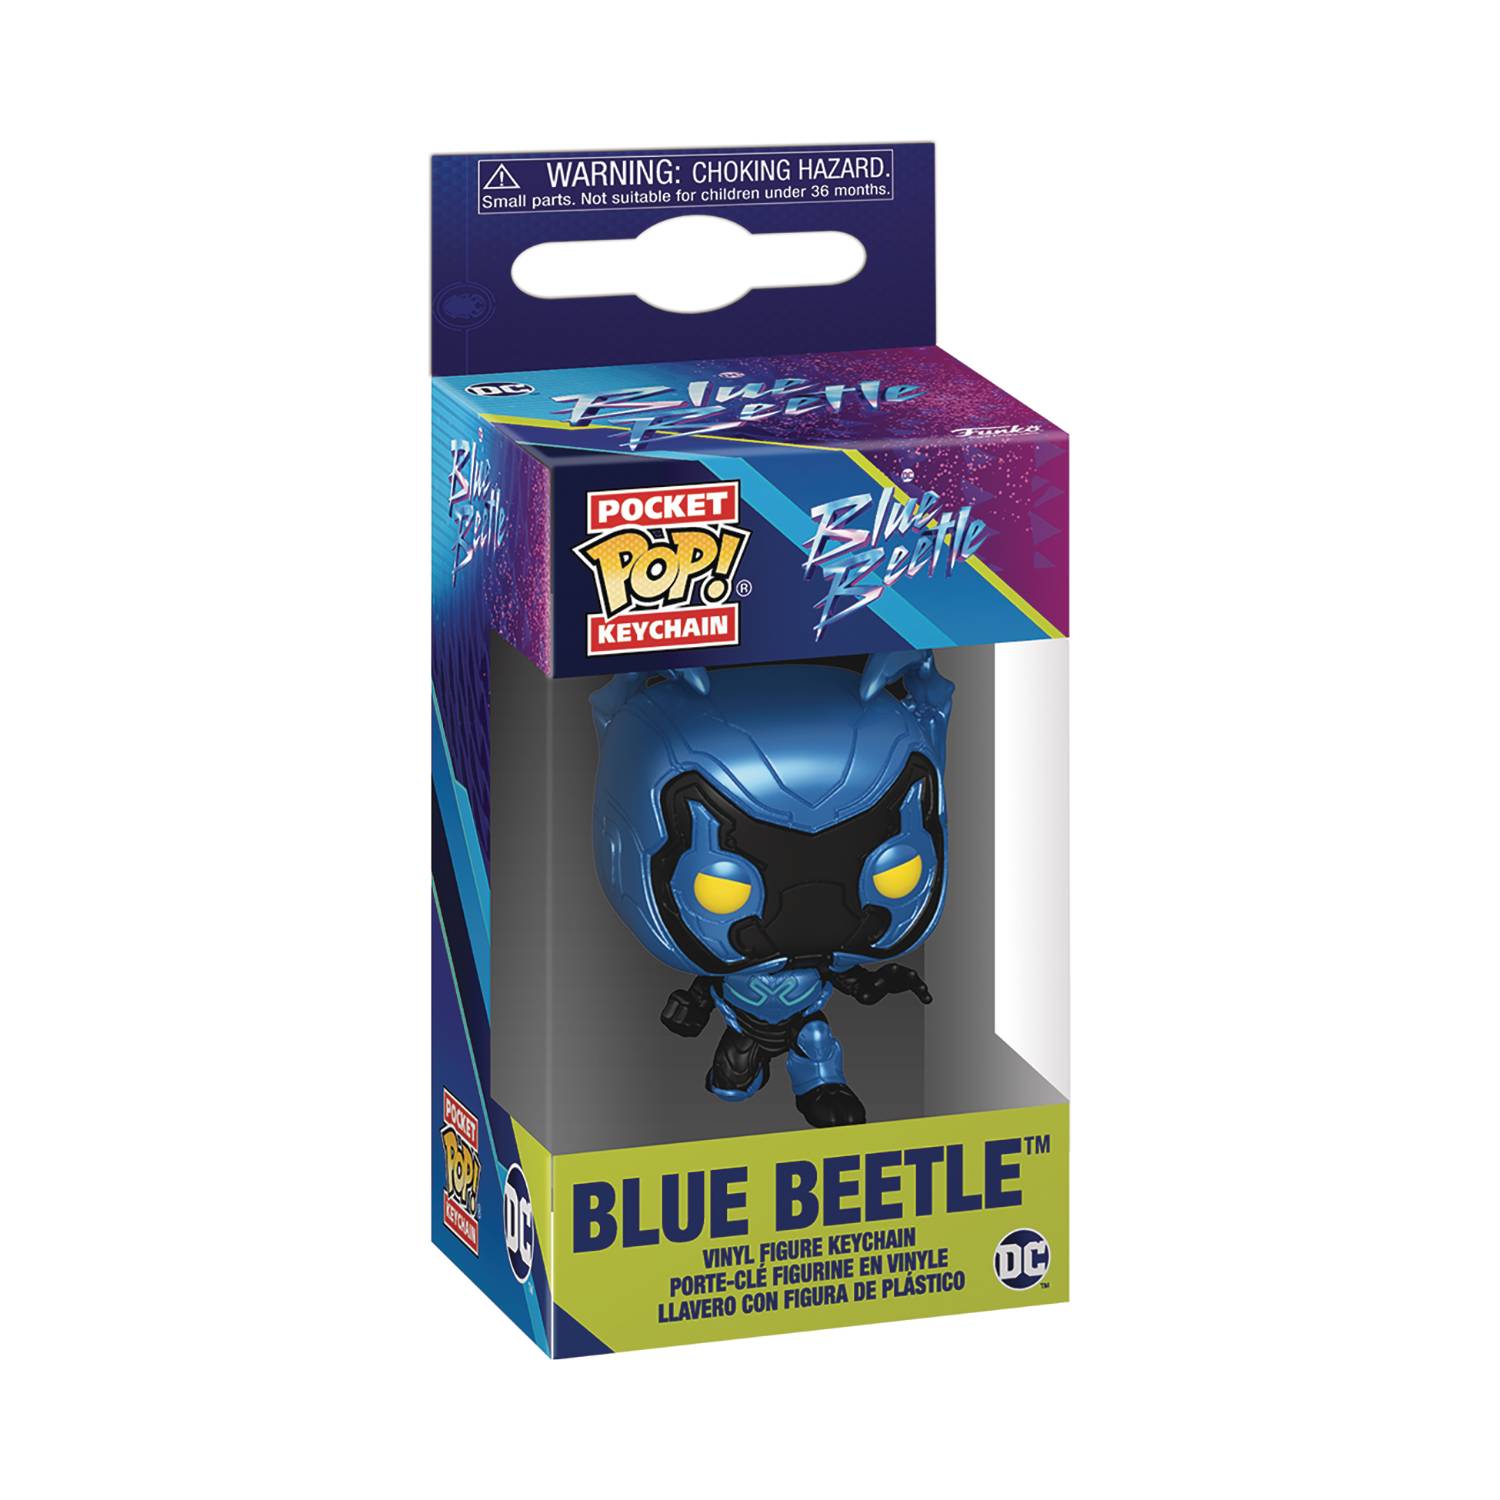 Movie Review: 'Blue Beetle' - Catholic Review